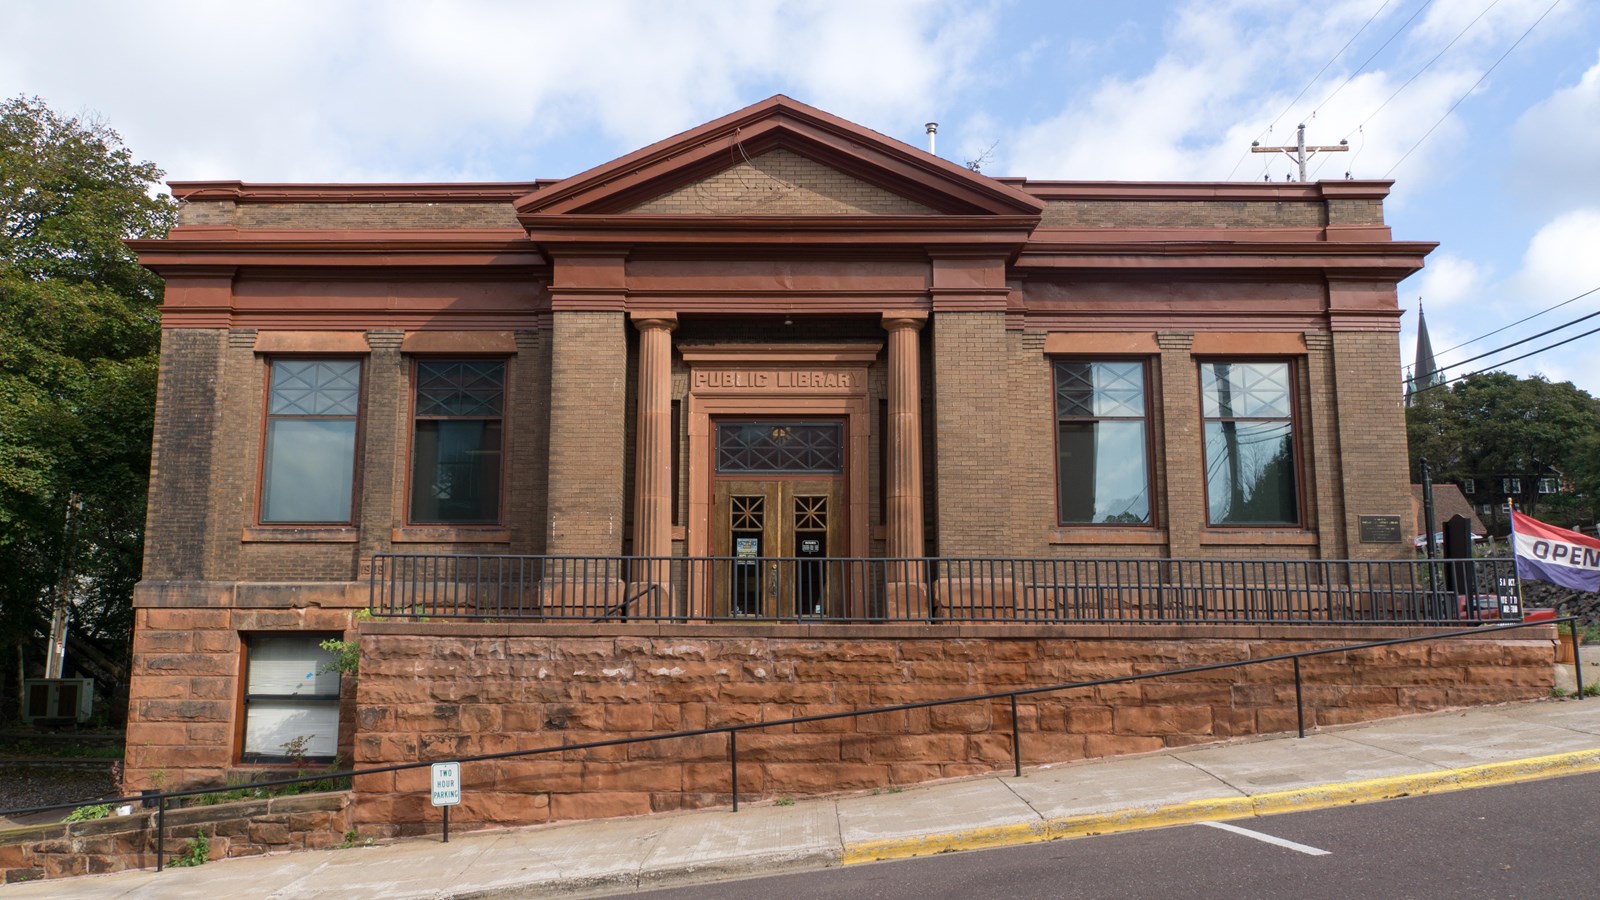 brick building with red sandstone foundation. A sign above the main entrance reads: public library.